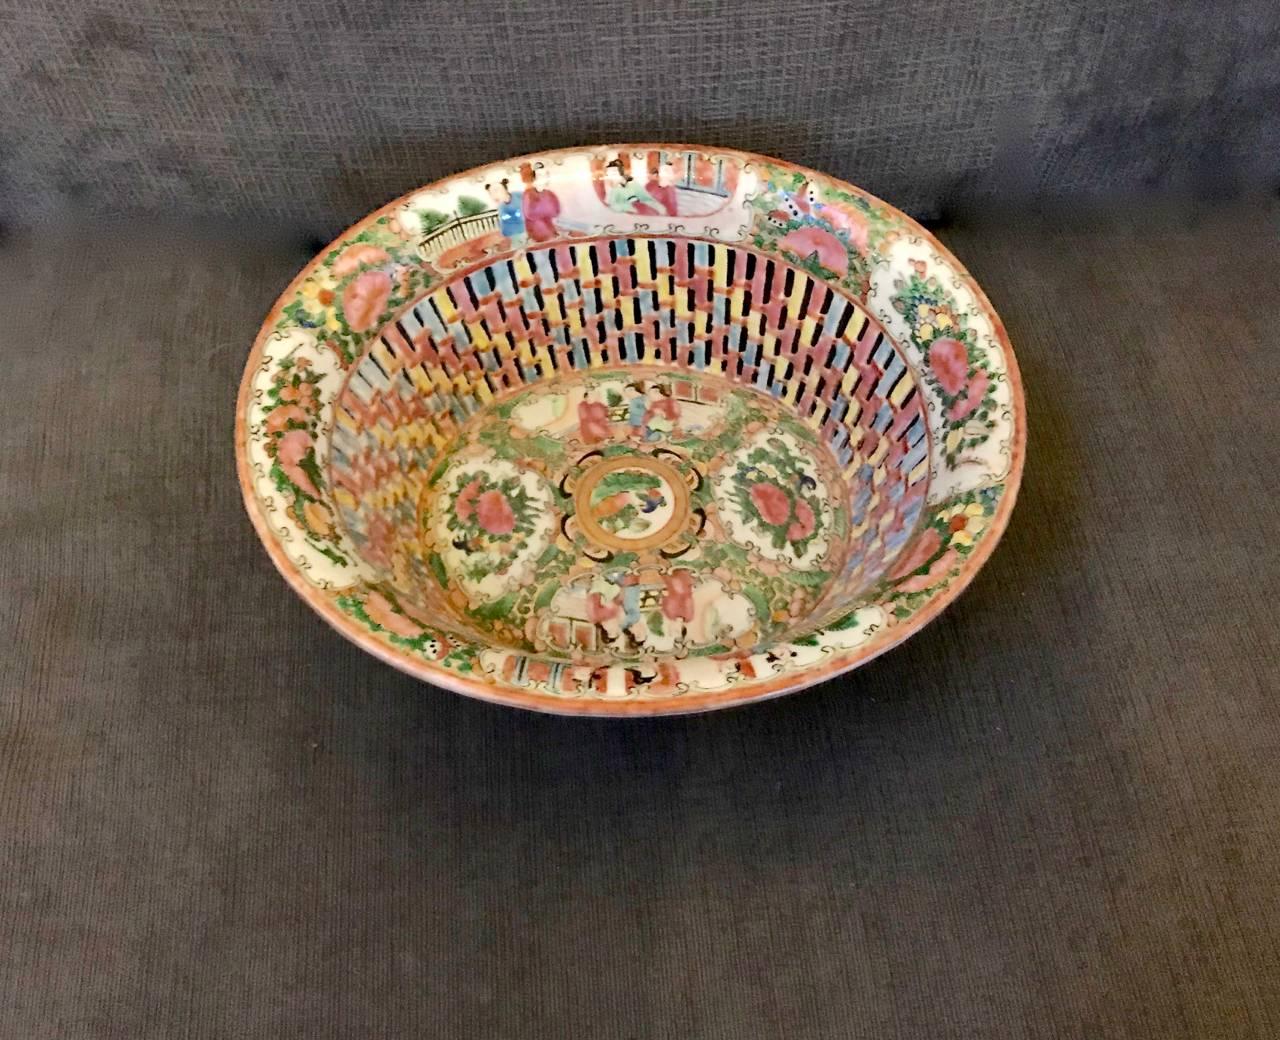 This is a classic example of a mid-19th century Chinese Export reticulated fruit or chestnut bowl with its original underplate in the Rose Medallion pattern. Both the bowl and its underplate are in overall very good condition with a tiny bit of